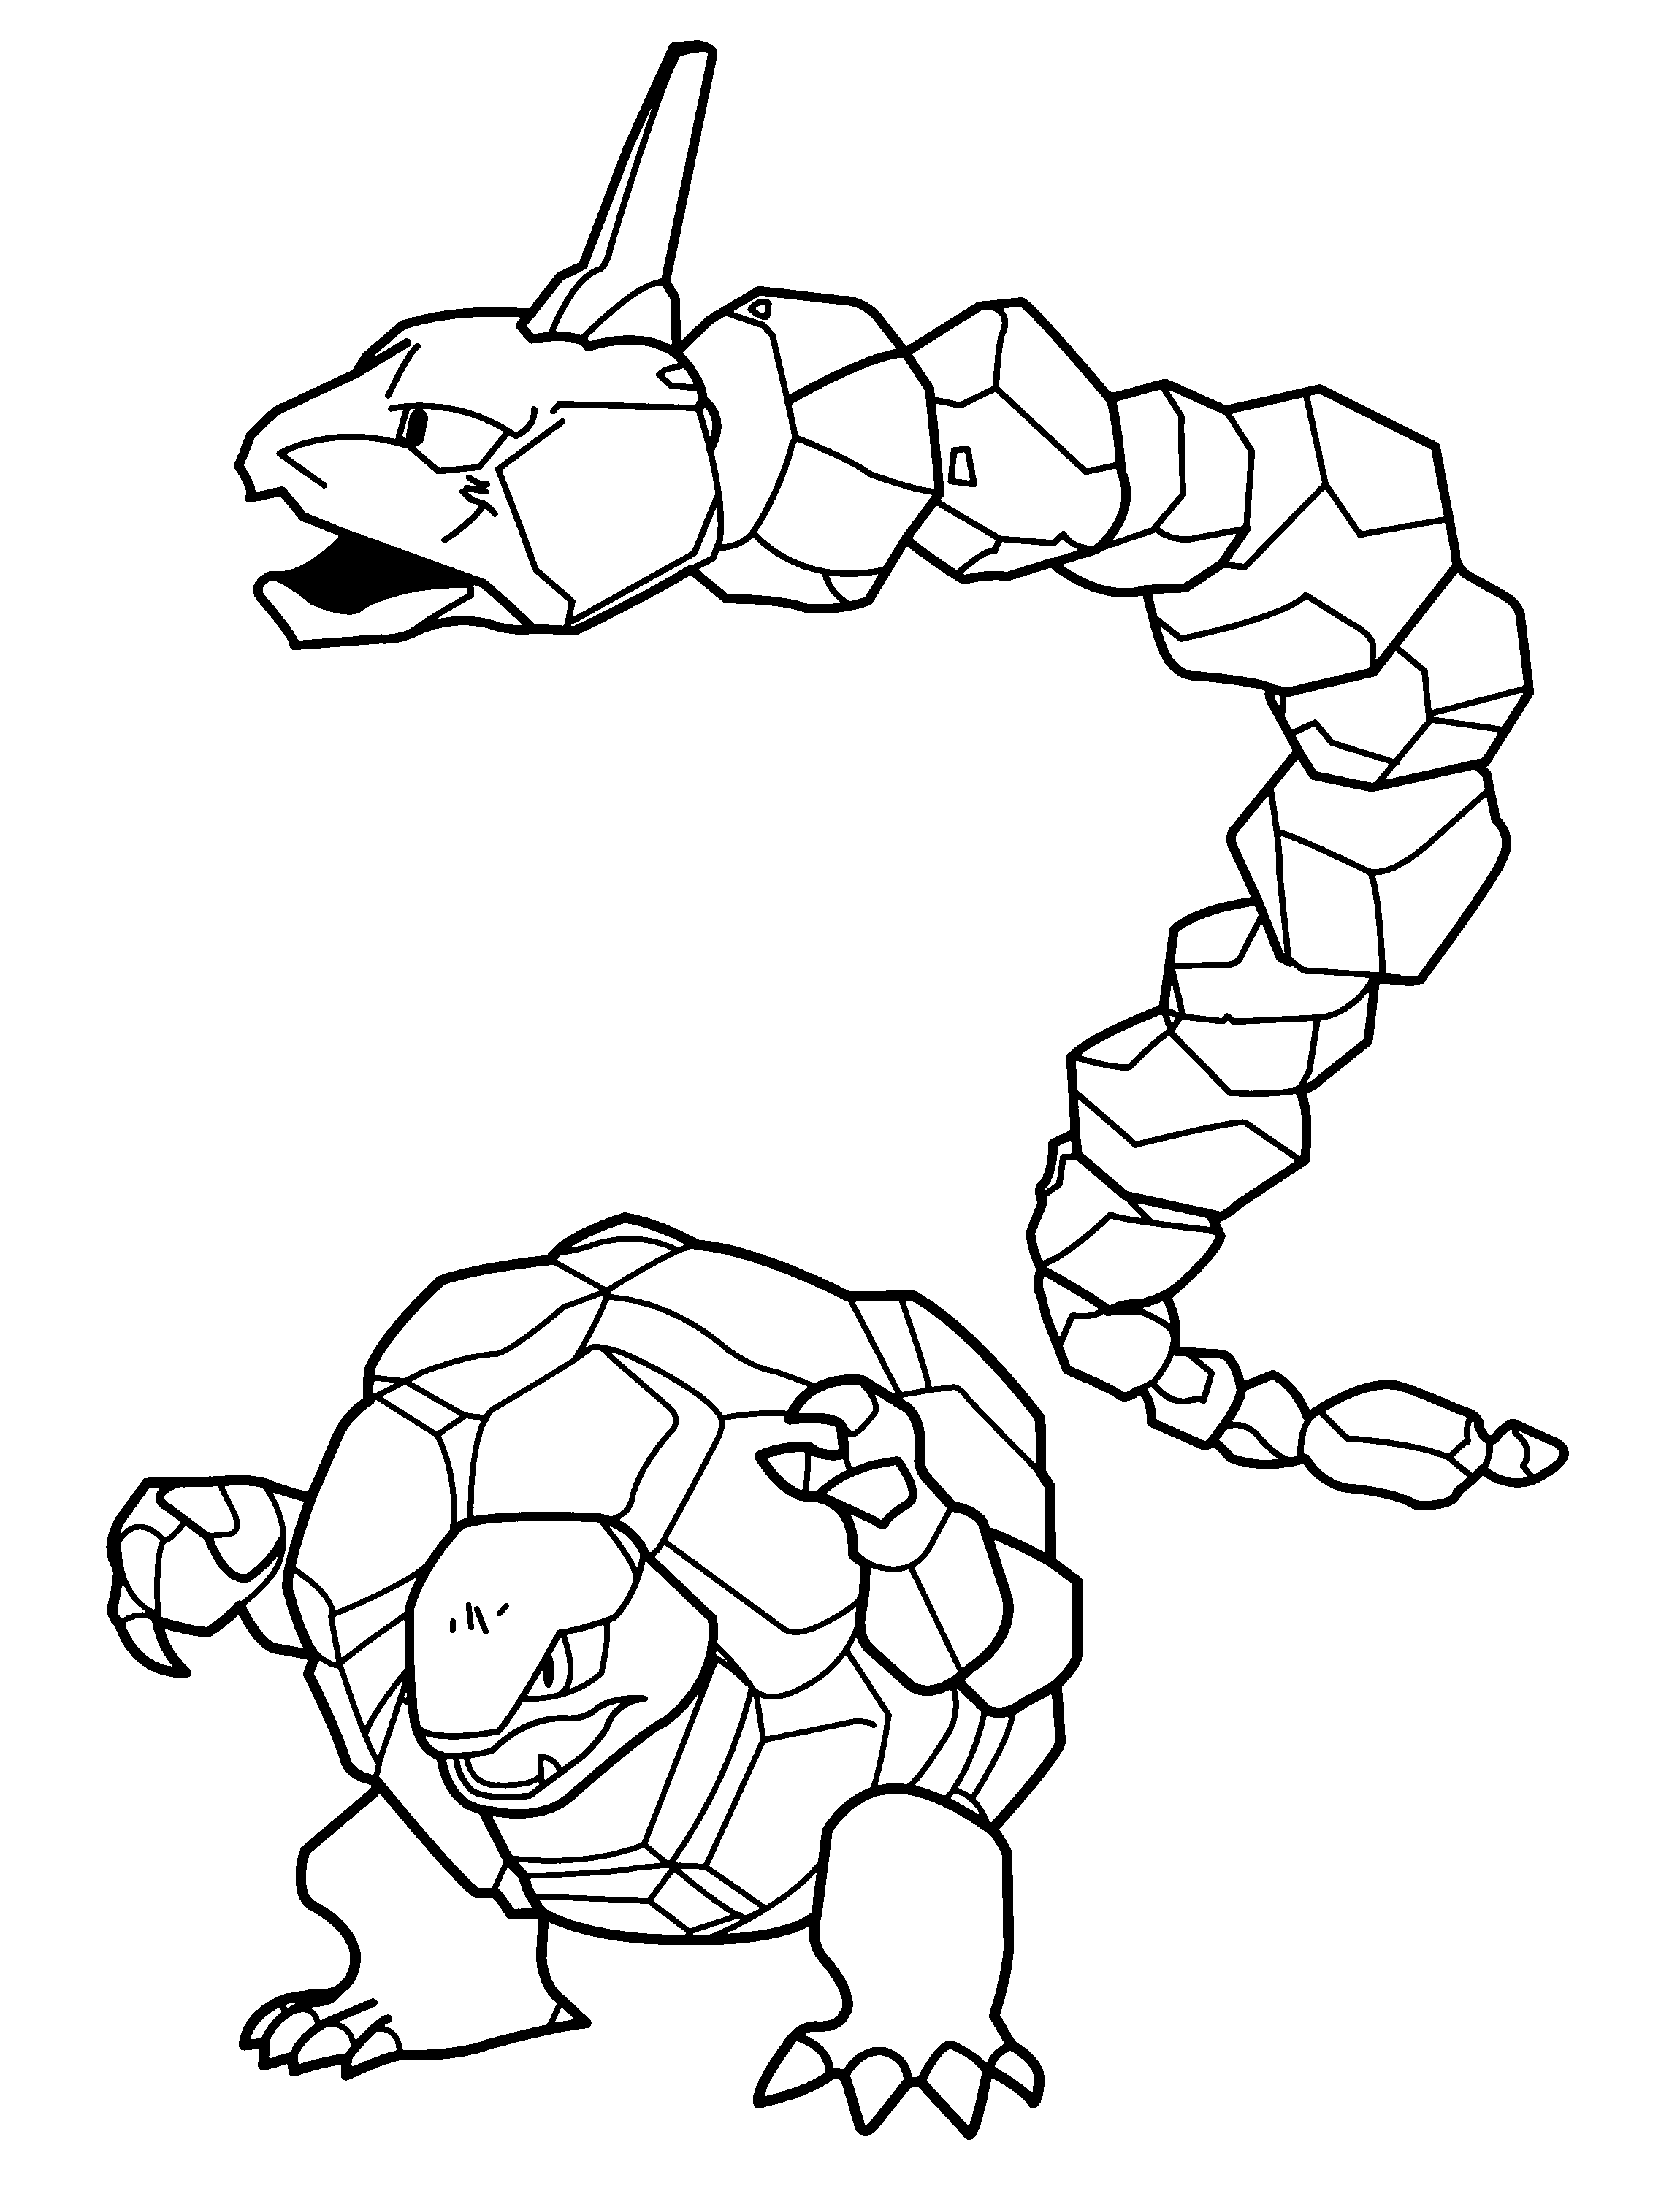 Coloring Page - Pokemon coloring pages 529